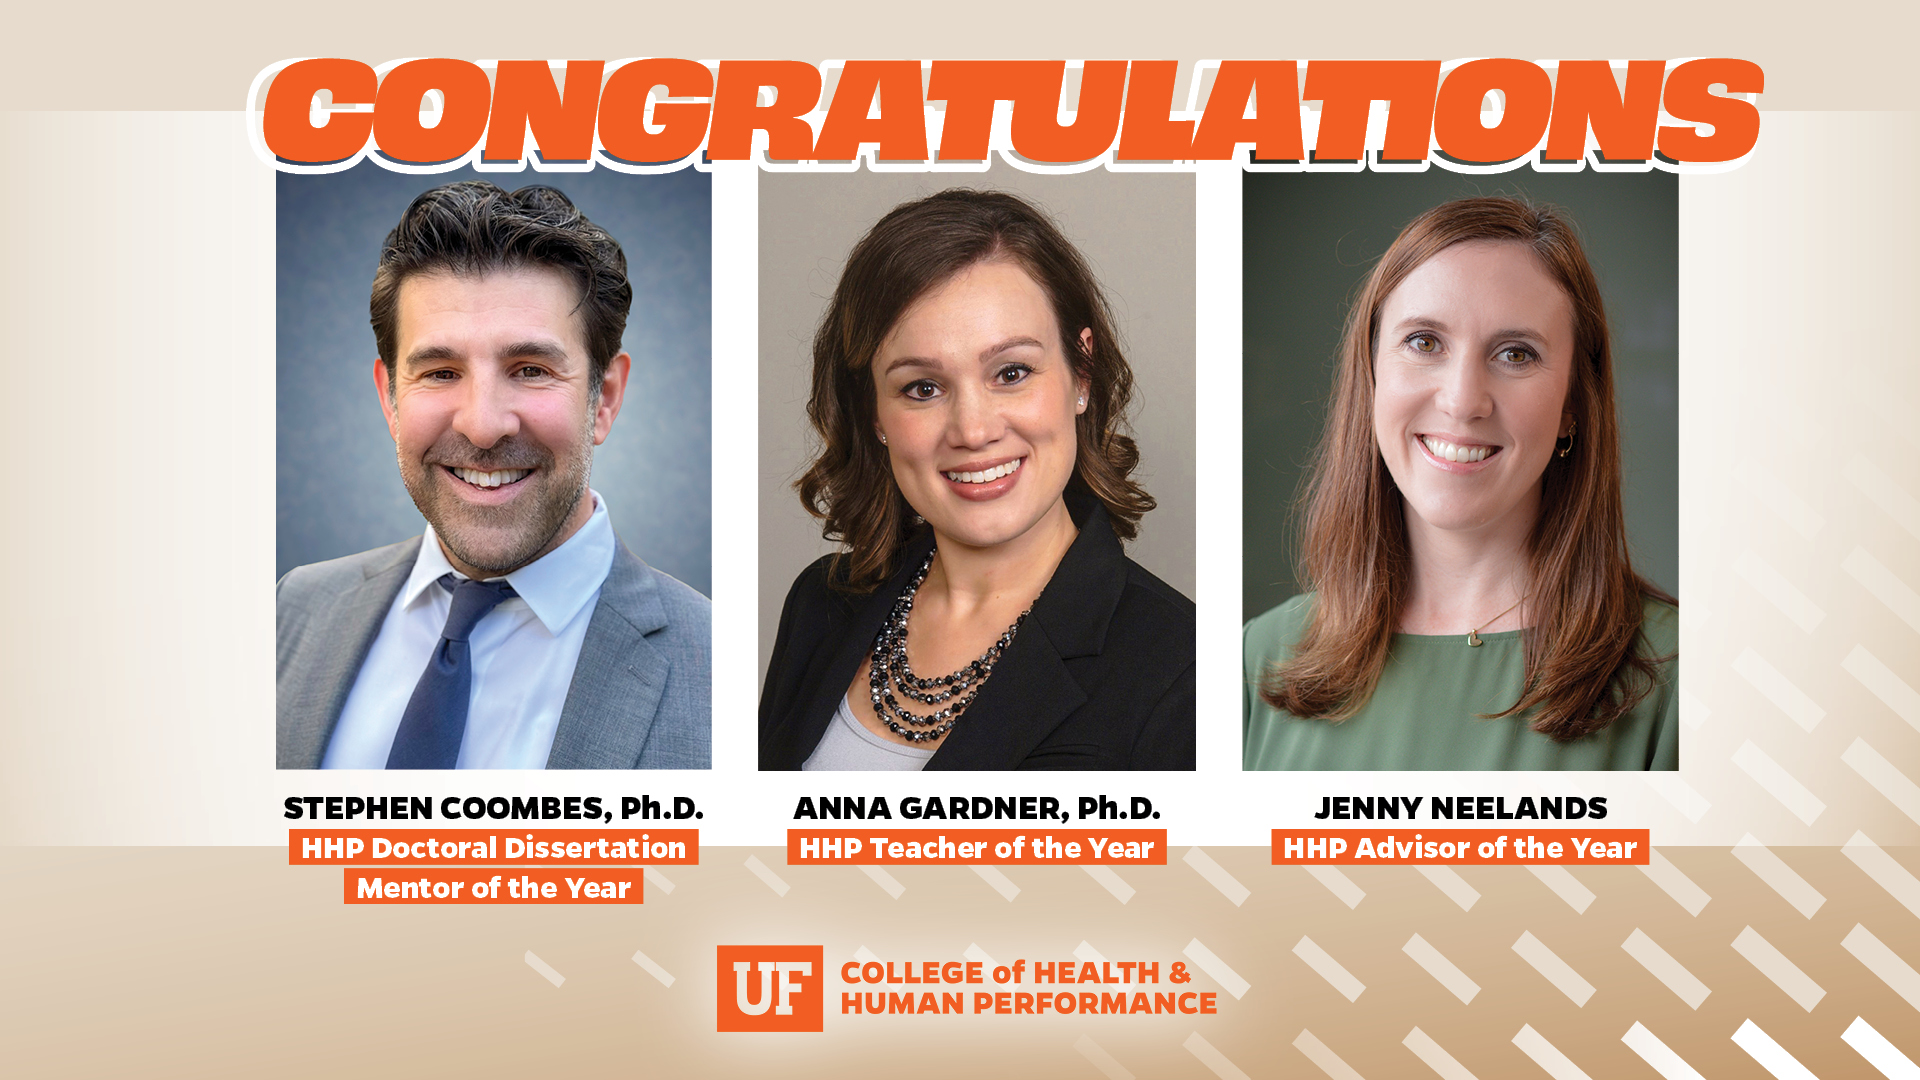 Celebrating the UF College of Health & Human Performance Educators of the Year